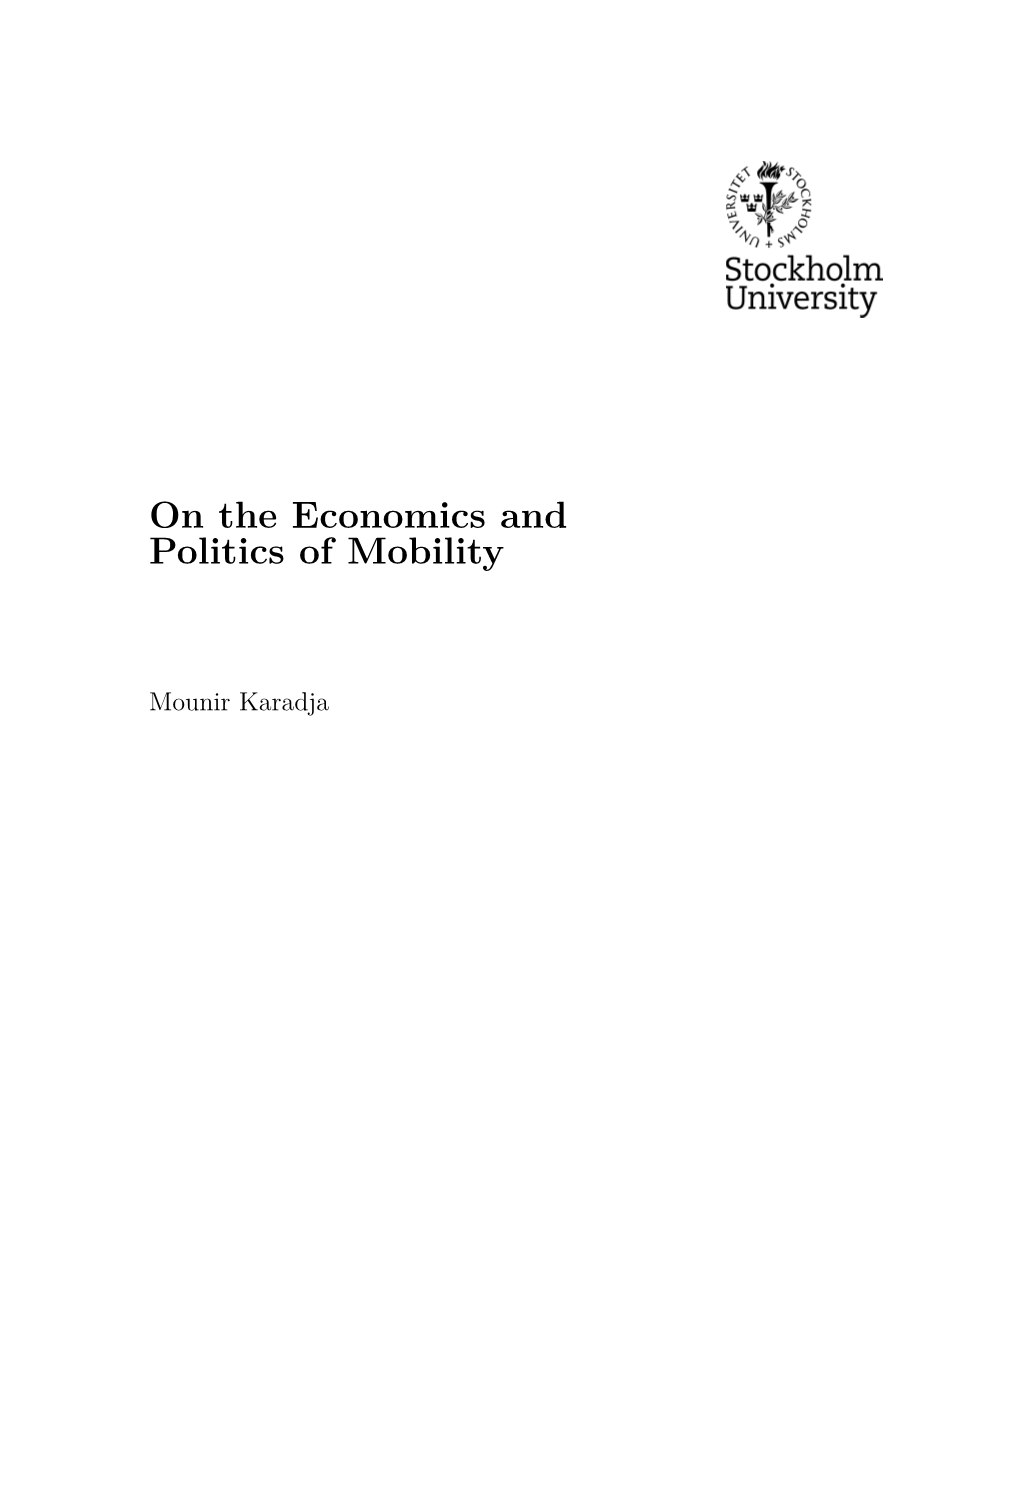 On the Economics and Politics of Mobility